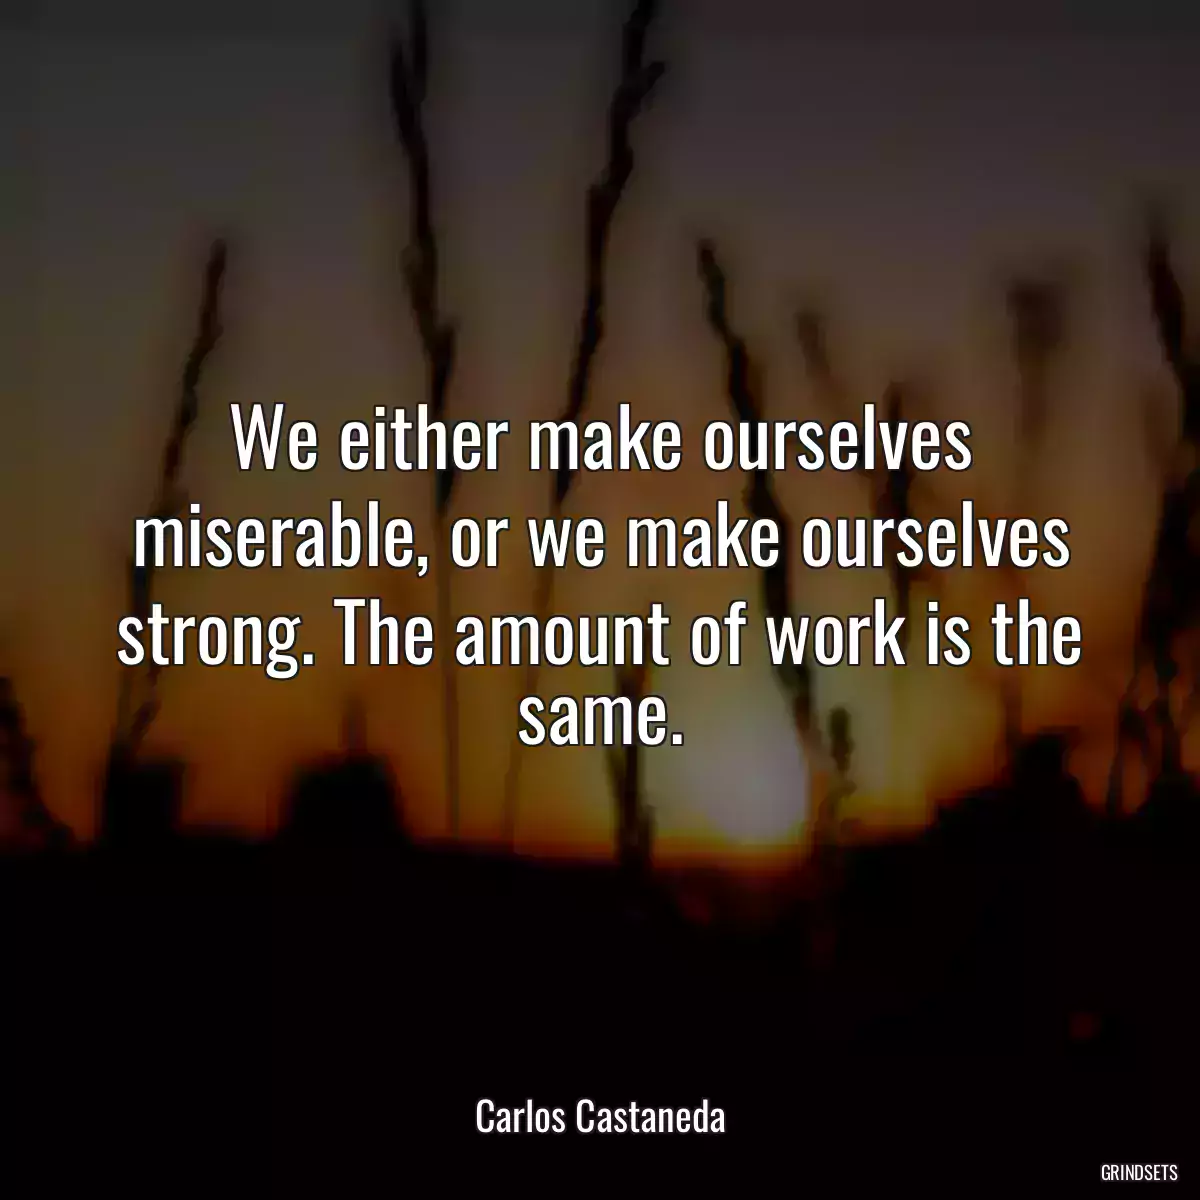 We either make ourselves miserable, or we make ourselves strong. The amount of work is the same.